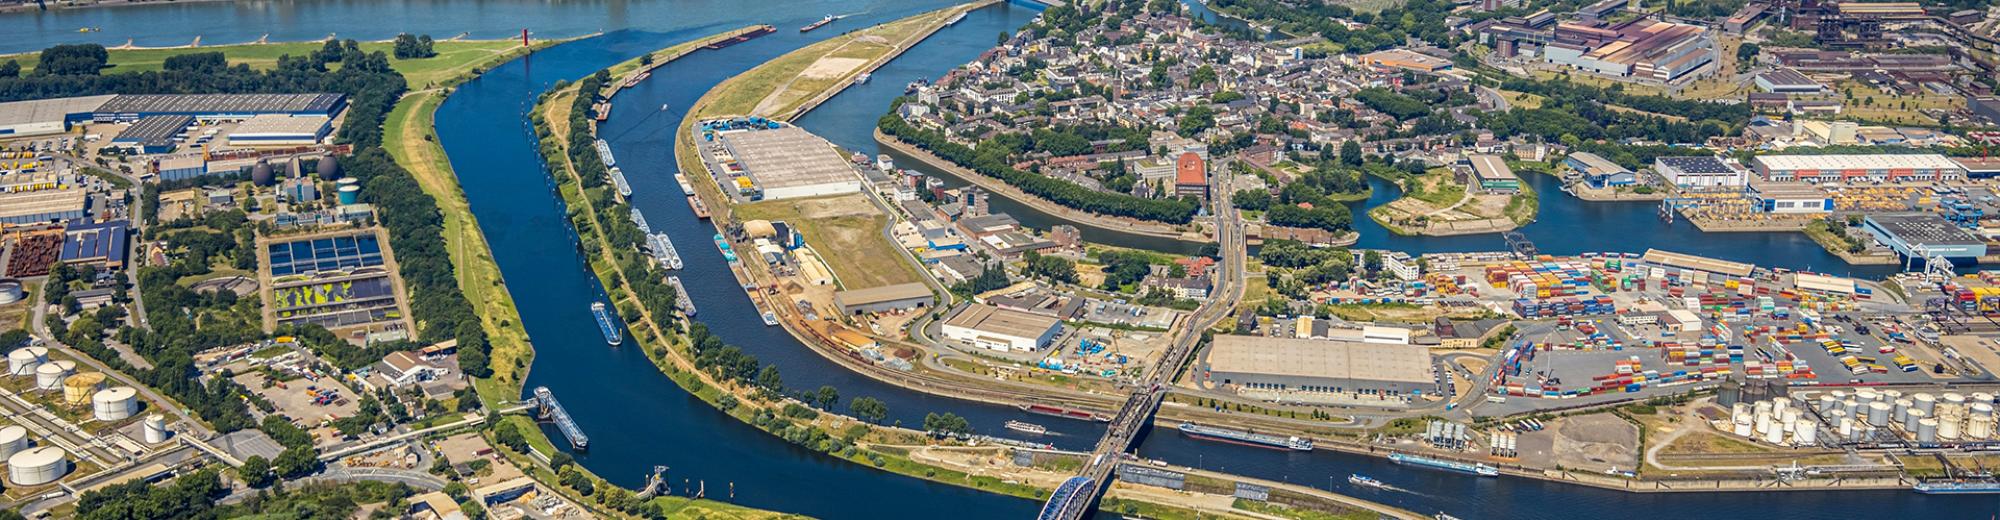 Duisburg is the logistics hotspot of Europe – and Seacon is right at the heart